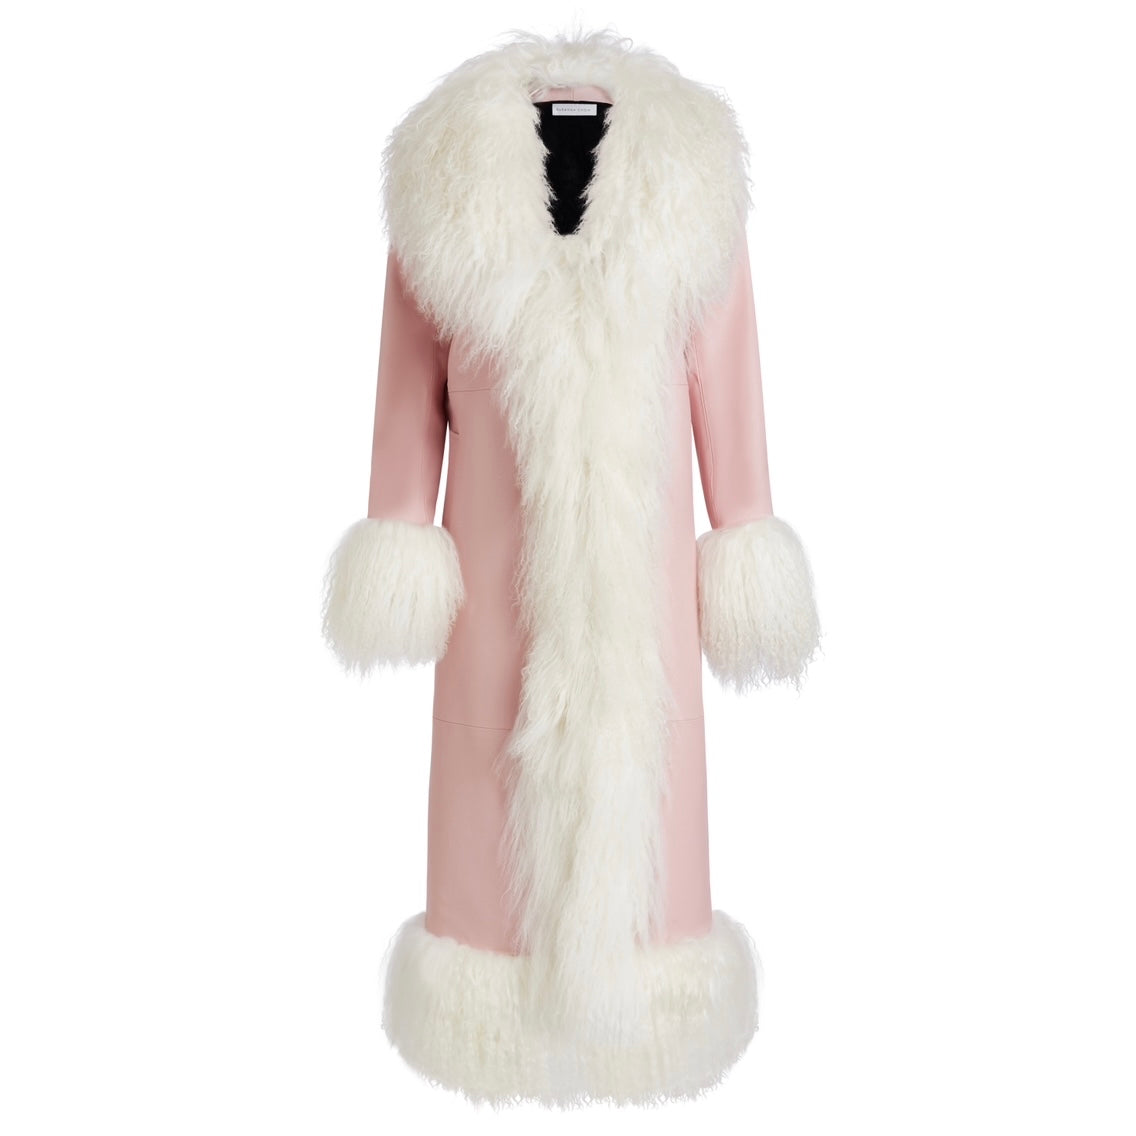 Dorothy Leather Shearling Maxi Coat - Baby Pink & White